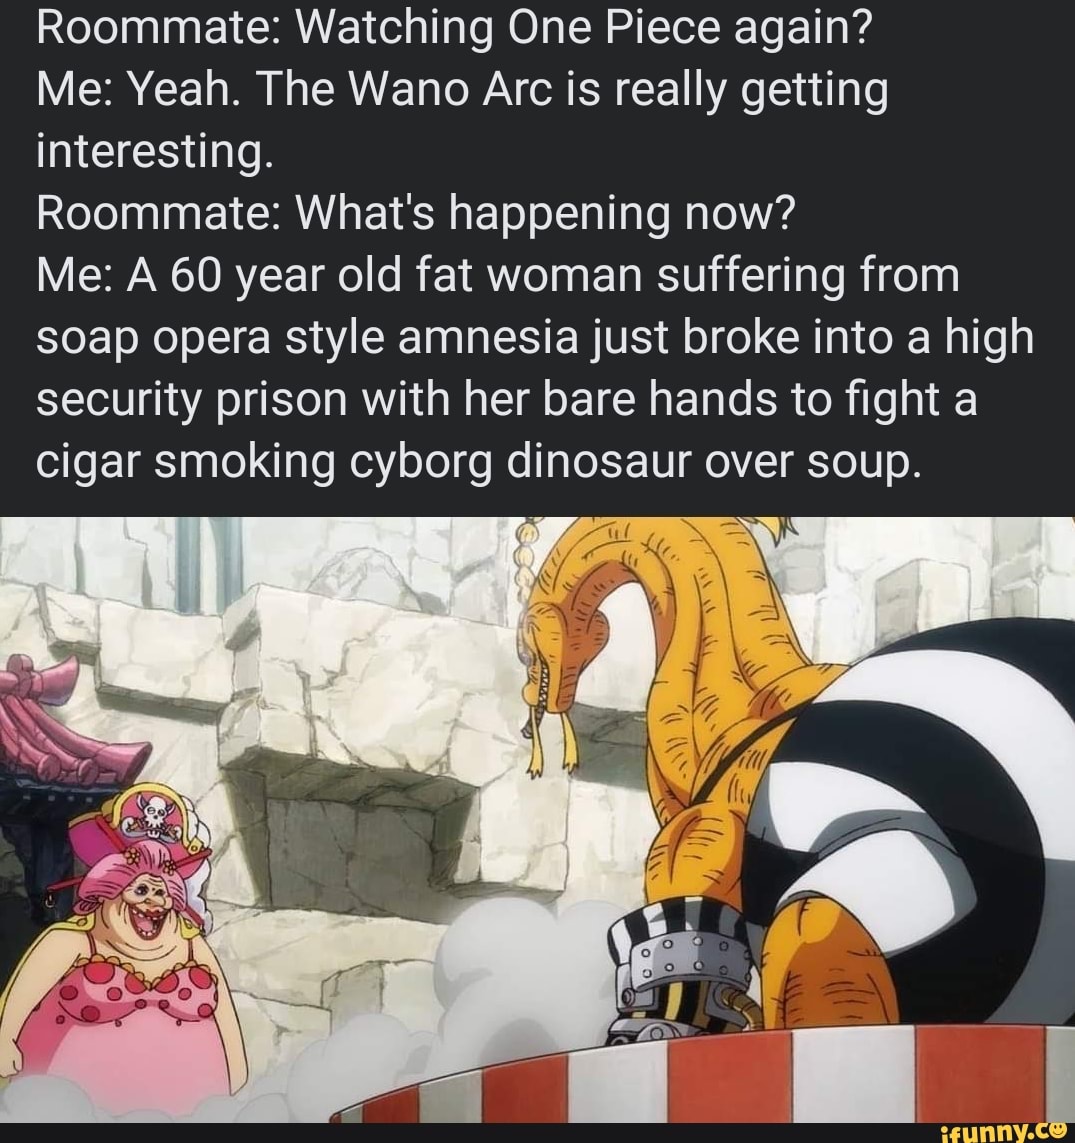 Roommate Watching One Piece Again Me Yeah The Wano Arc Is Really Getting Interesting Roommate What S